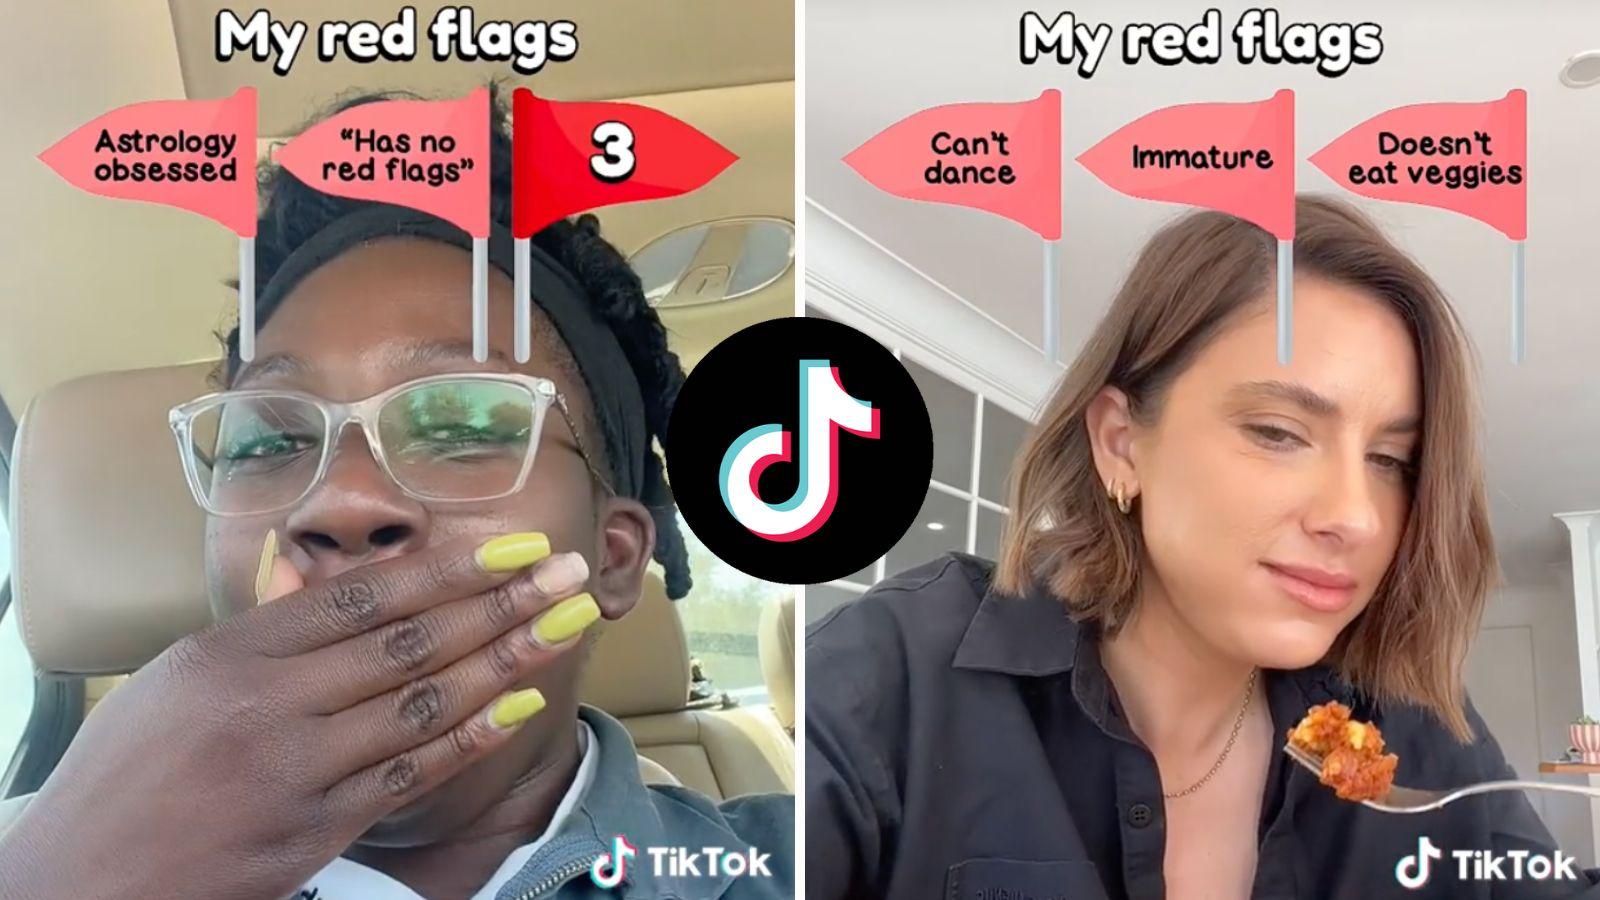 Two TikTok users trying out the red flag filter